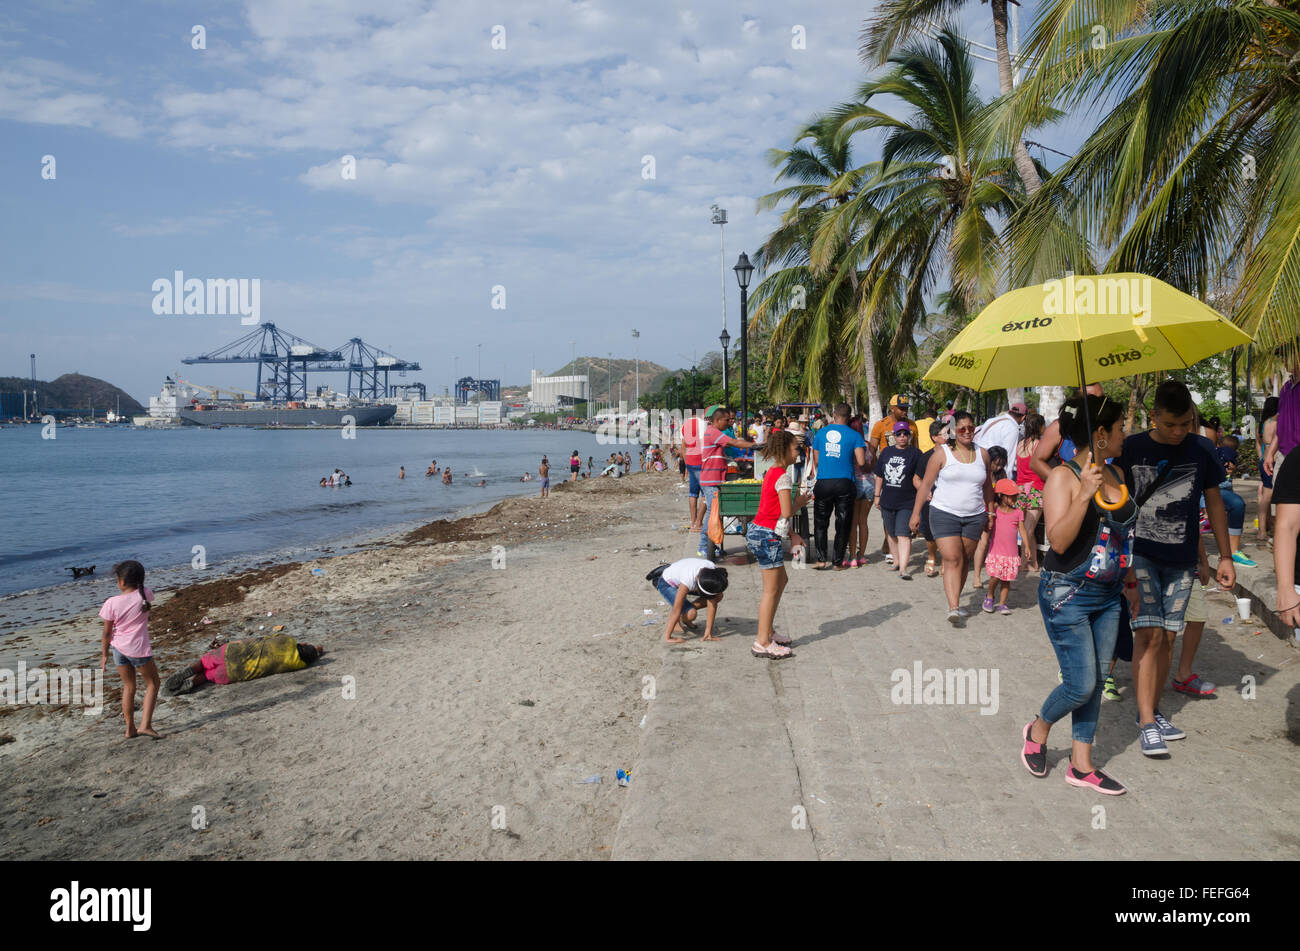 Tourists and locals strolling along the seafront in Santa Marta on the Caribbean coast of Colombia Stock Photo